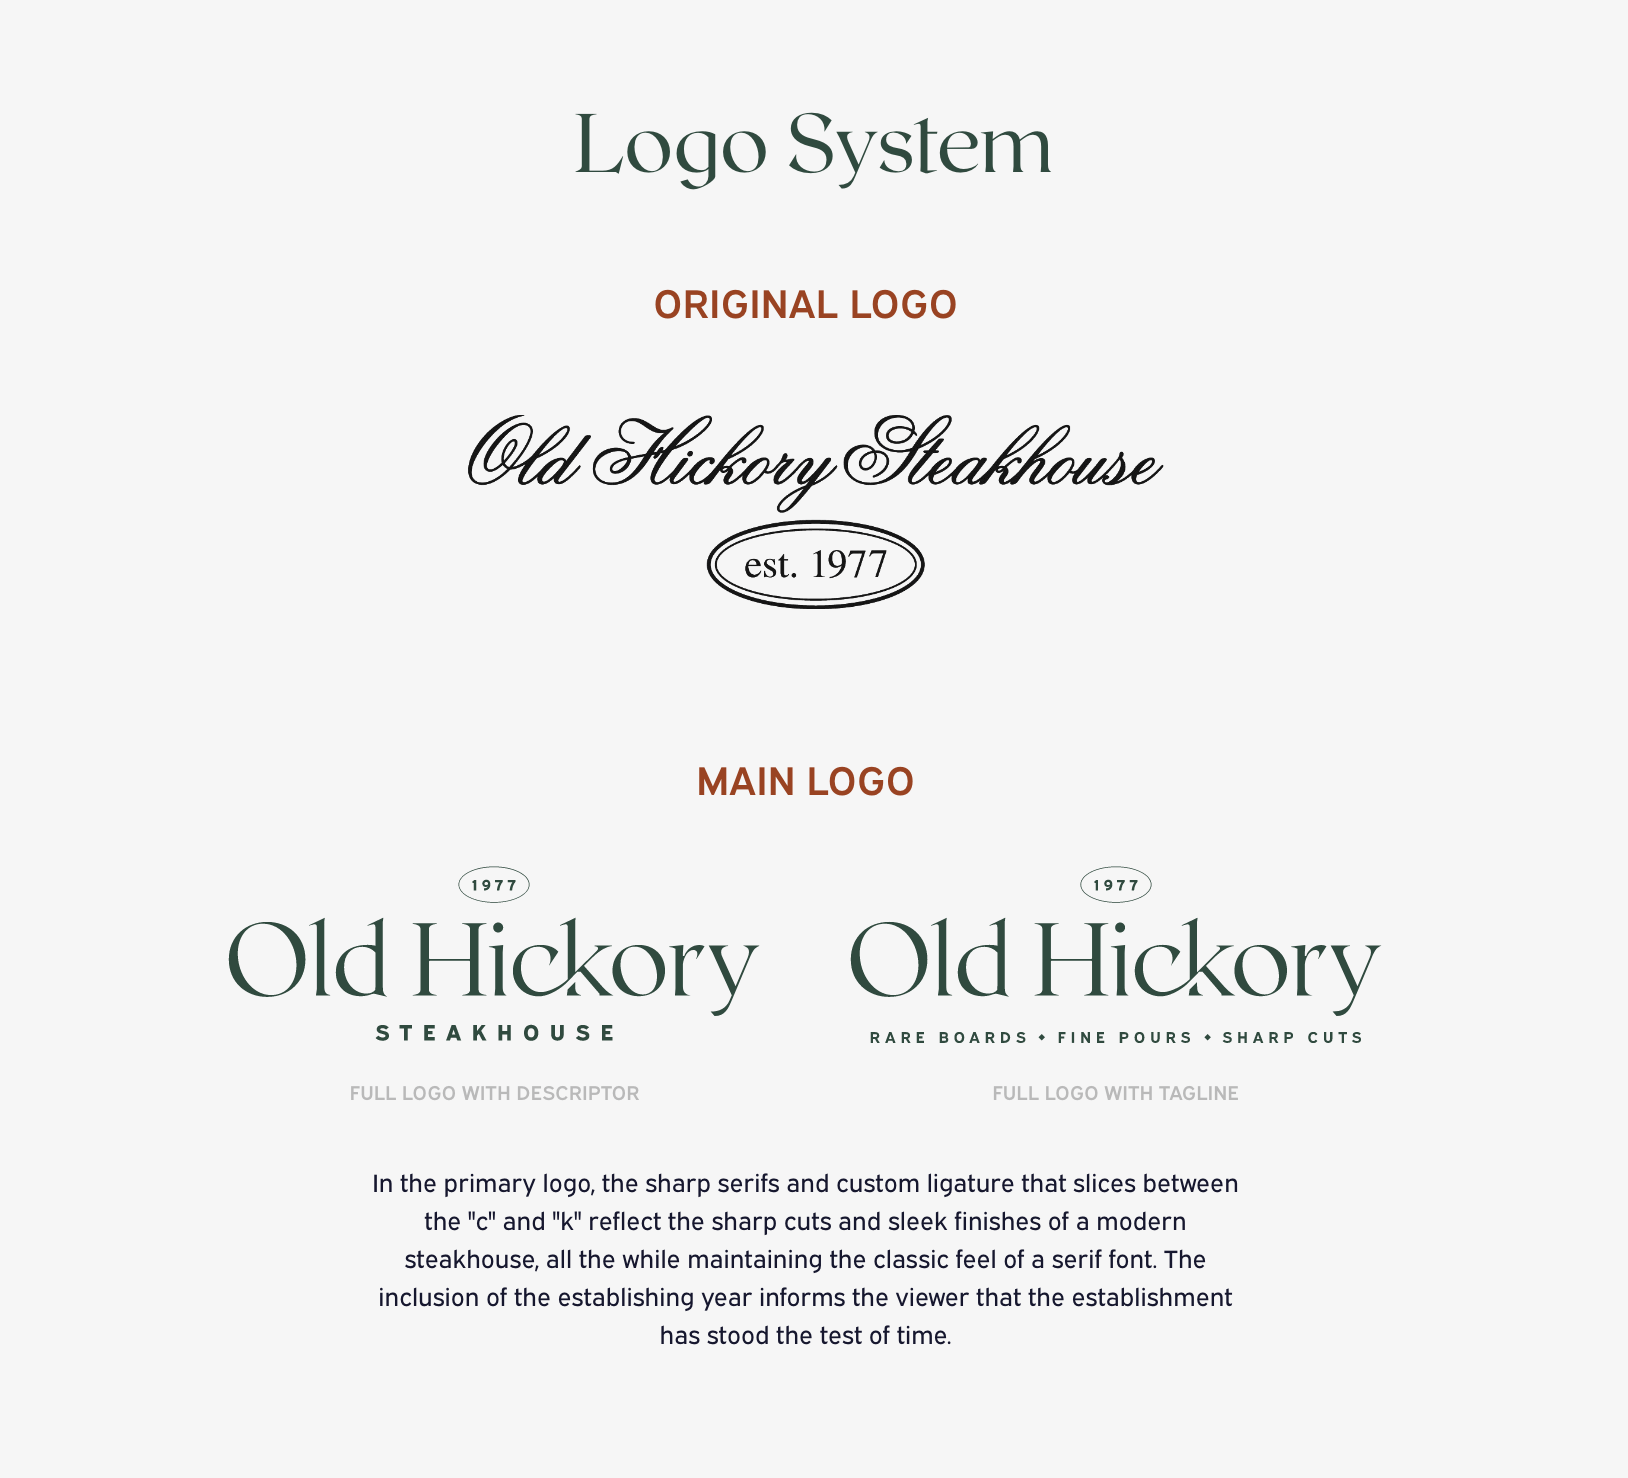 Logo system showing original logos and main logos with two versions, one with descriptor and one with tagline. The text below reads: In the primary logo, the sharp serifs and custom ligature that slices between the 